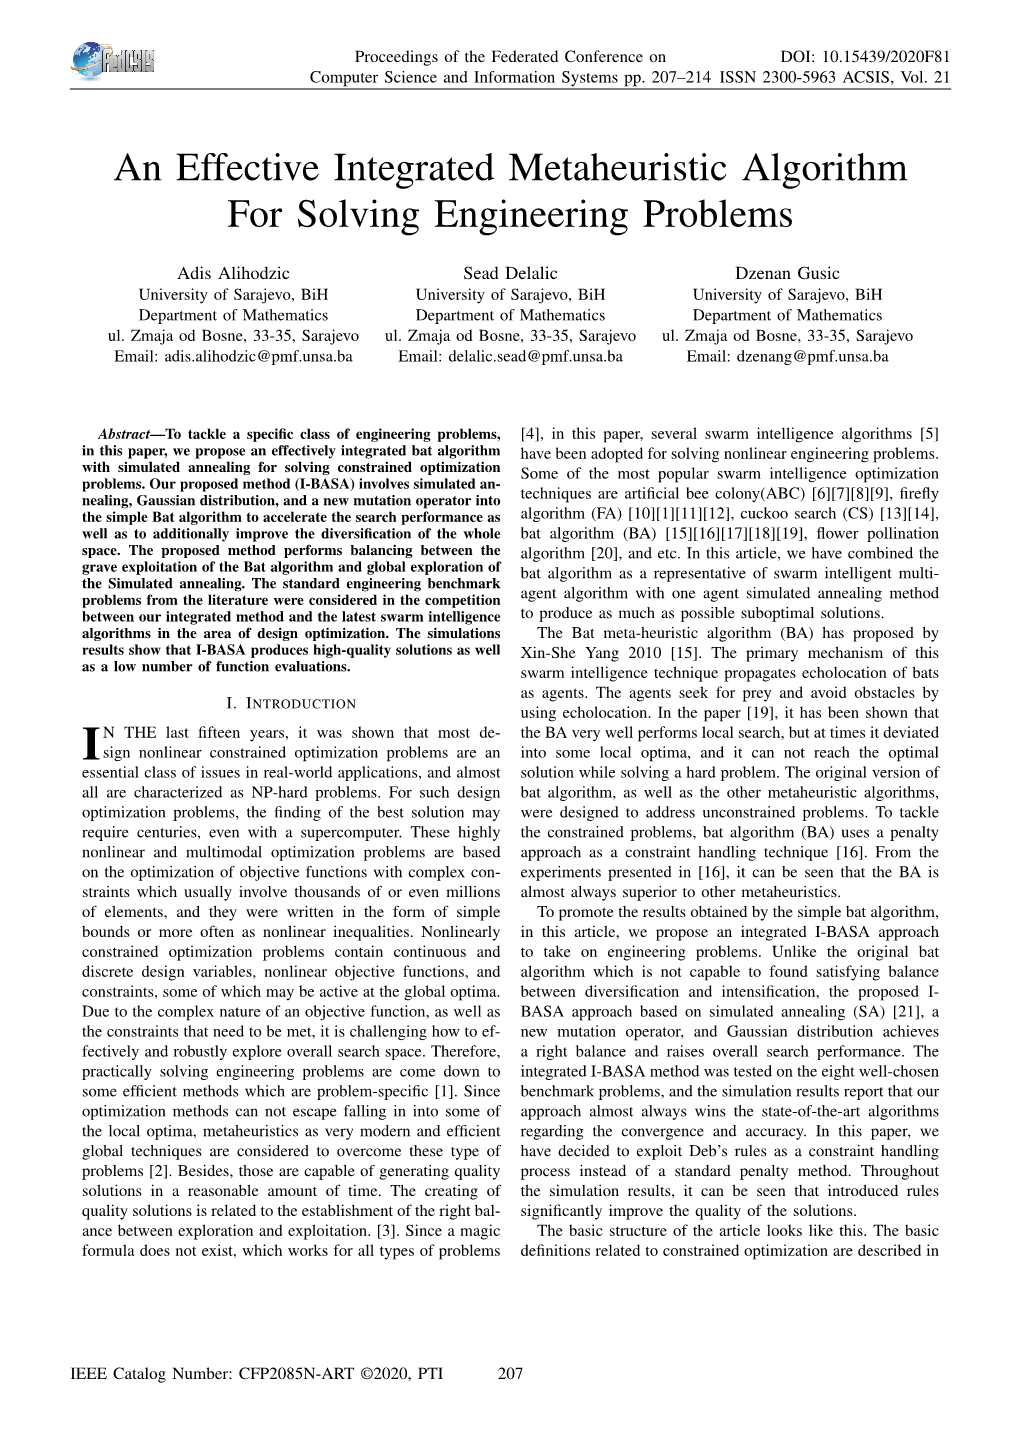 An Effective Integrated Metaheuristic Algorithm for Solving Engineering Problems